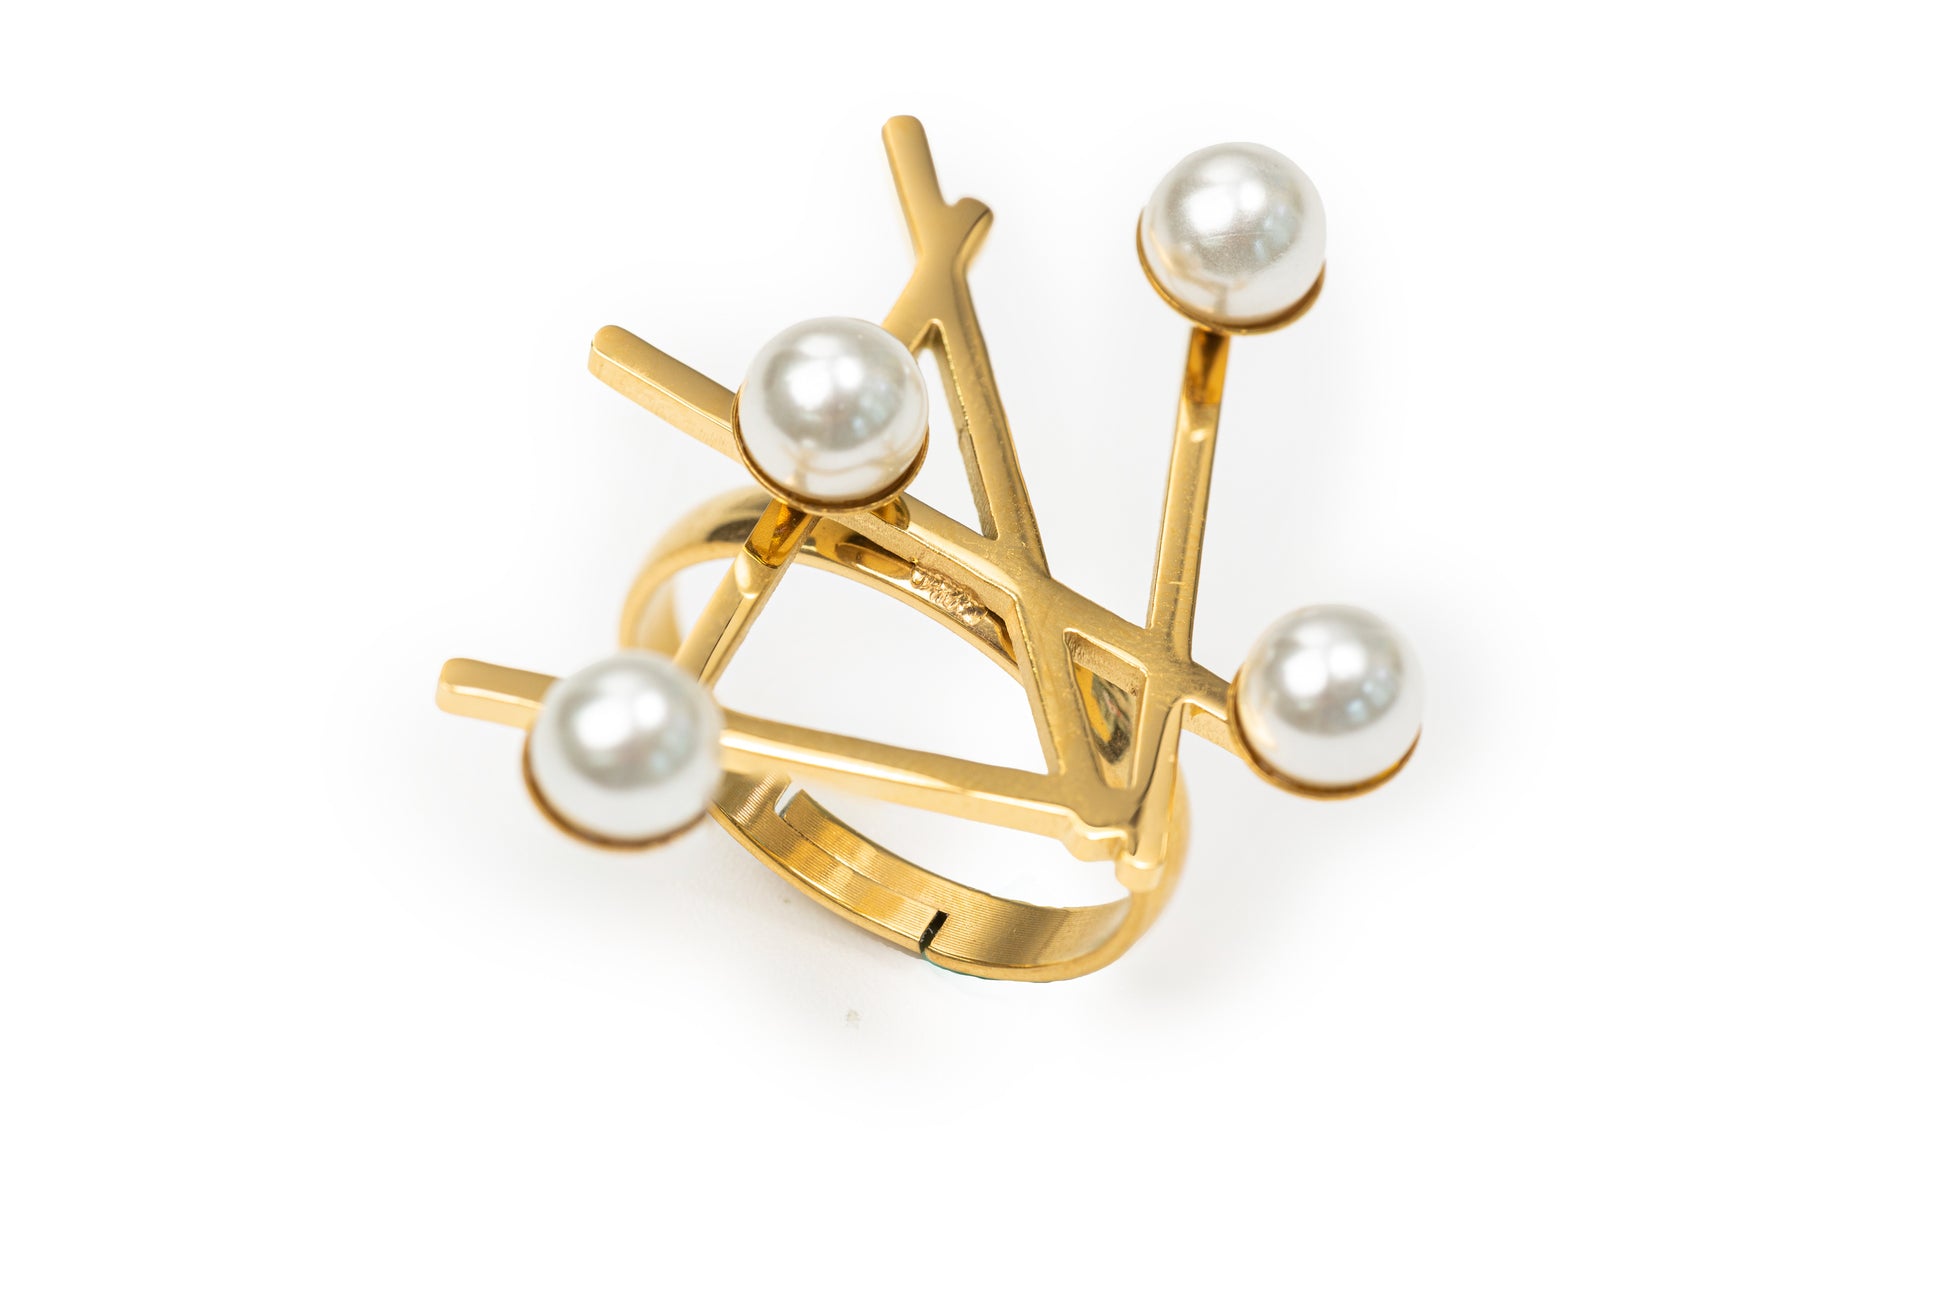 Planderful Golden Art Ring with Freshwater Pearls - Golden Freshwater Pearls Ring for Women (Gold-Plated Copper)